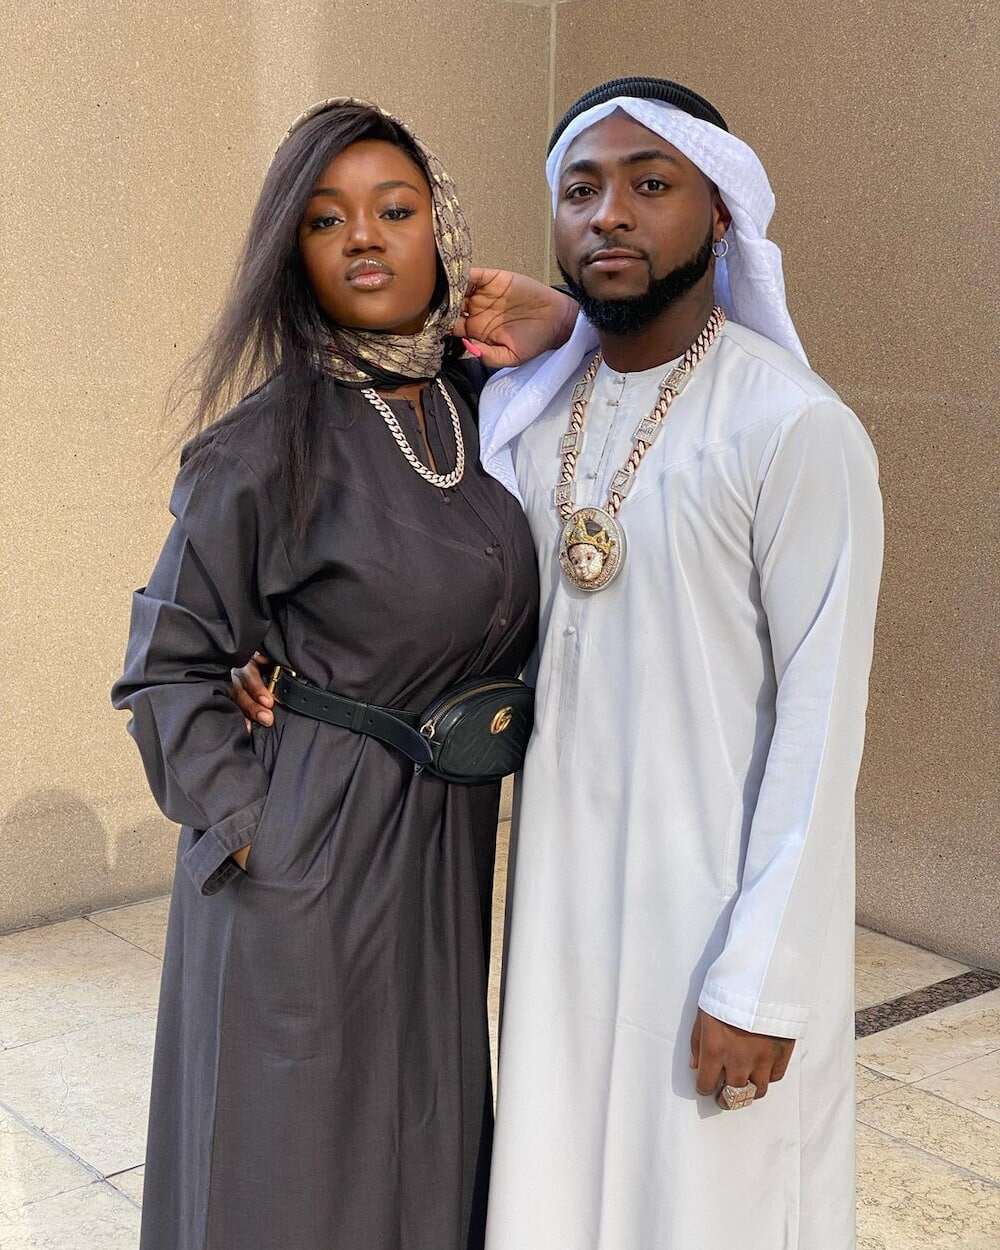 Chioma and Davido left together after she turned up for show he performed in with a 30BG chain